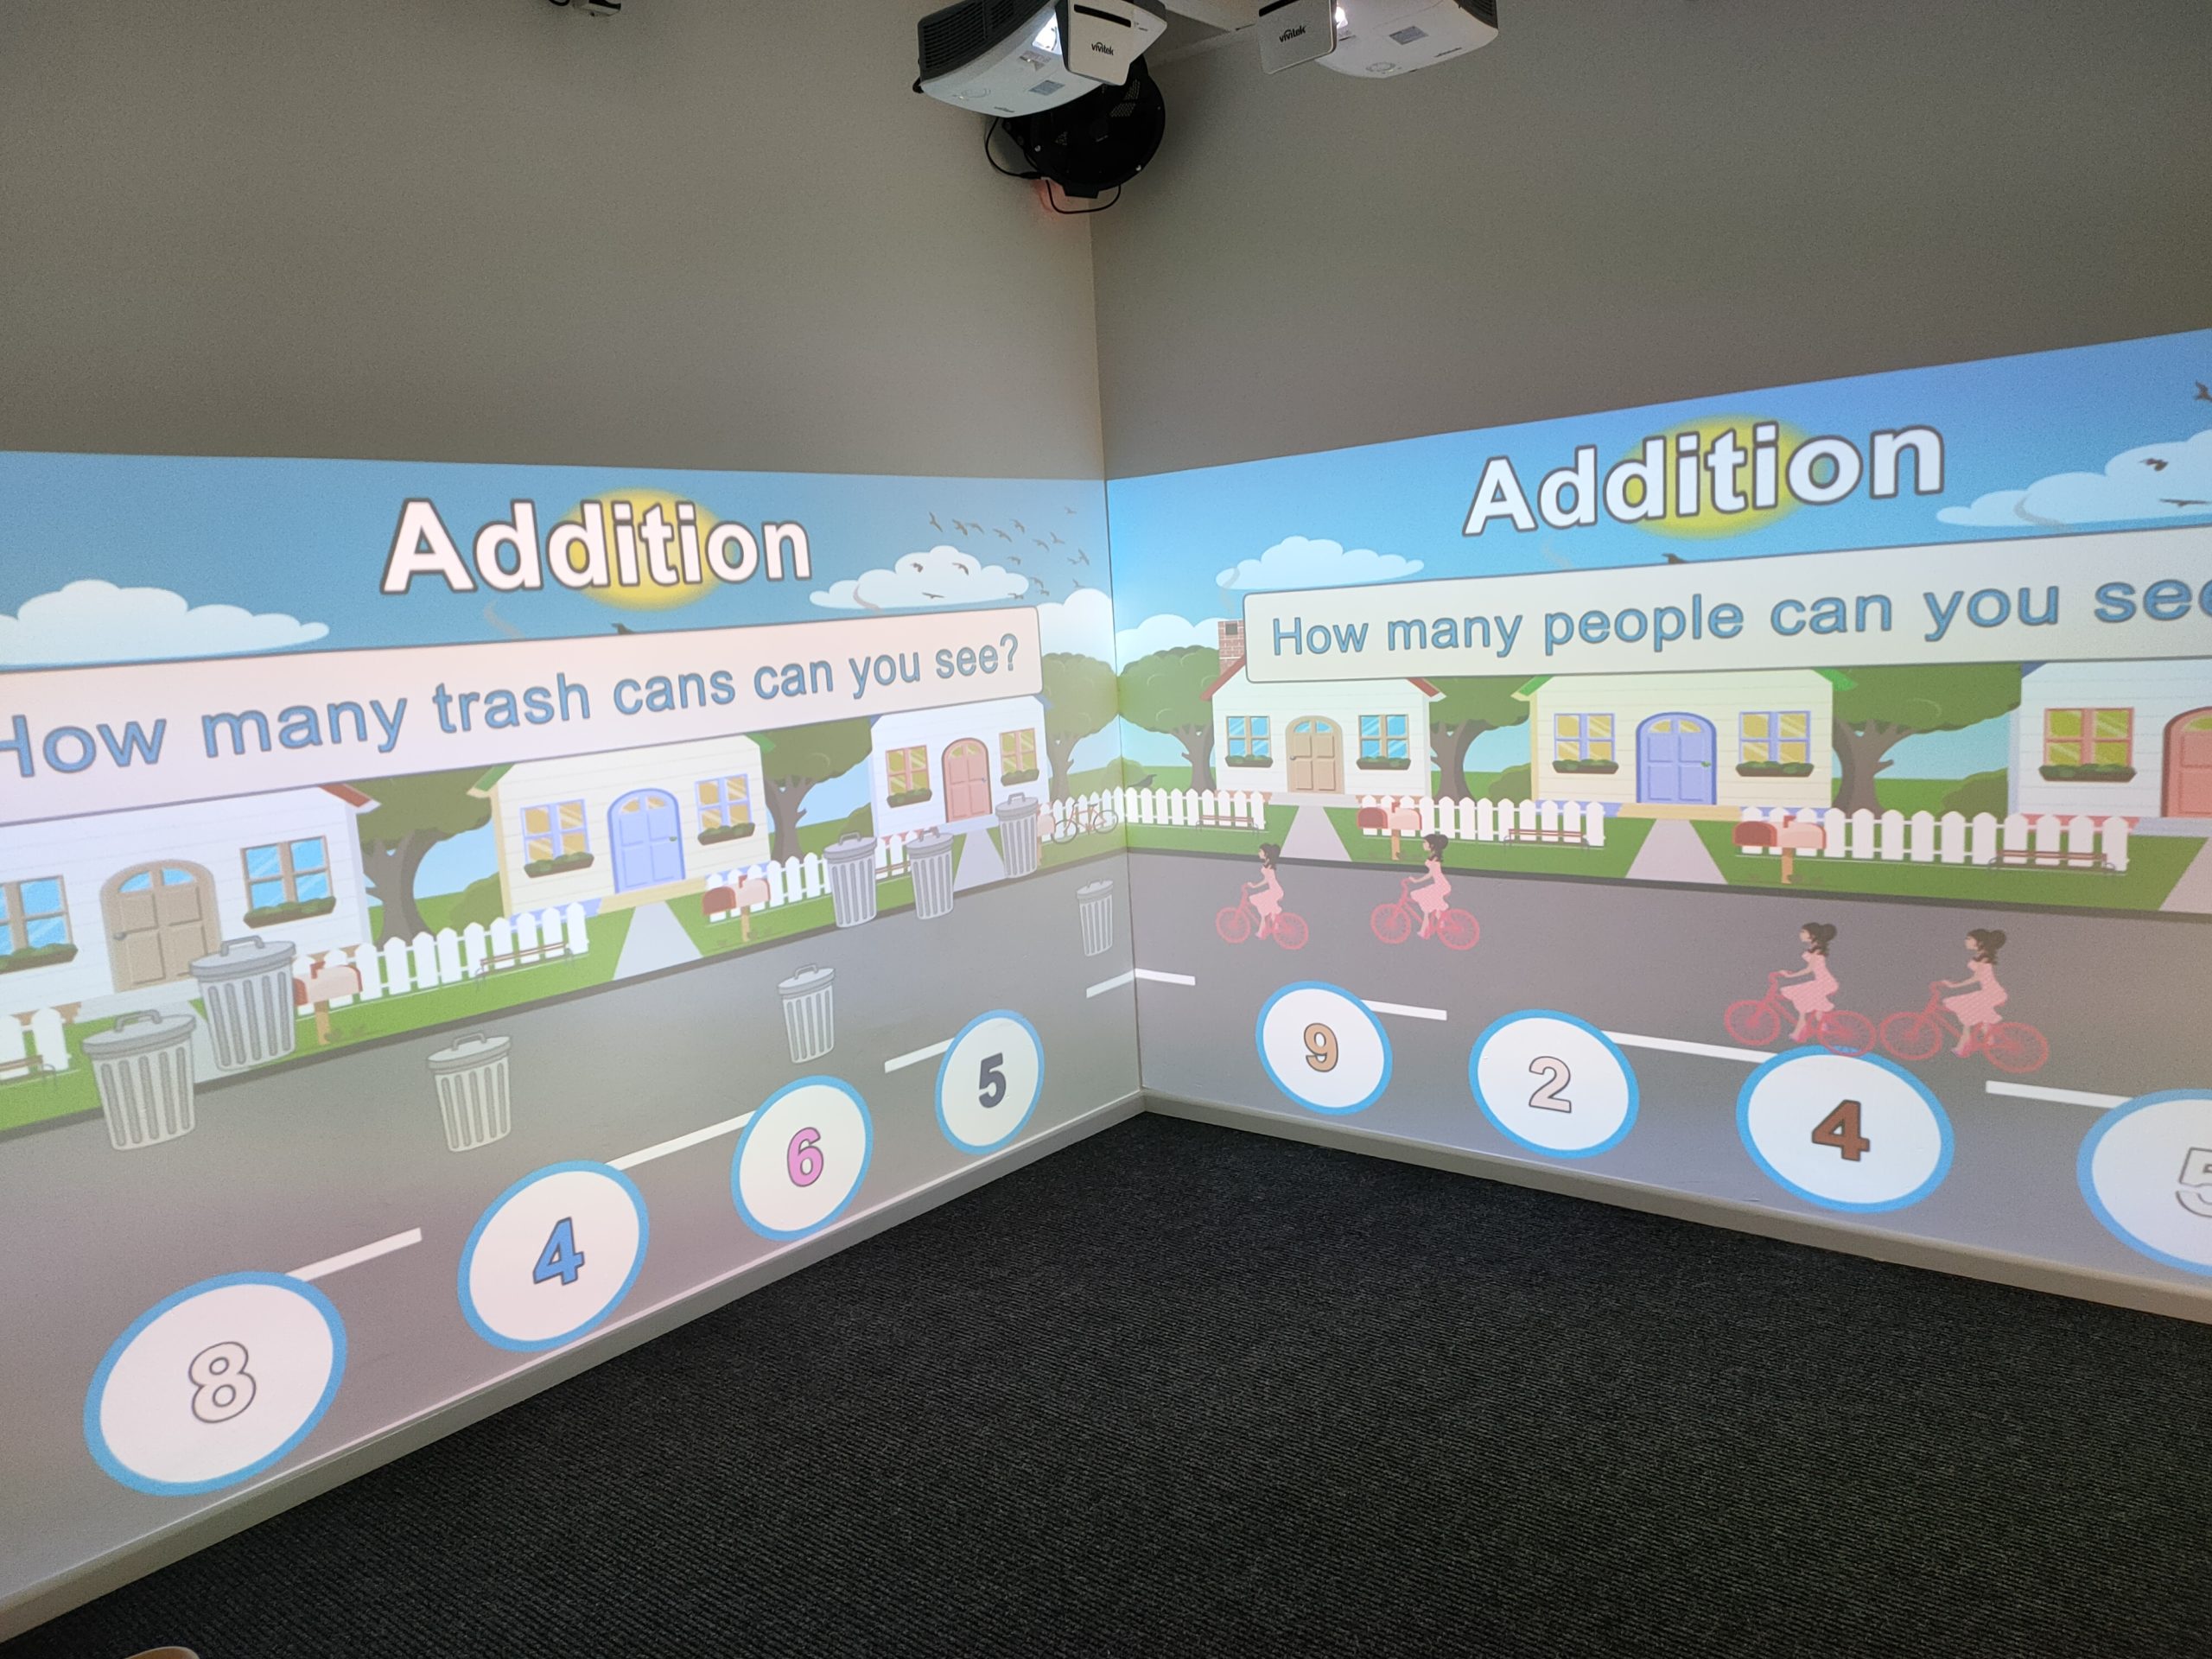 Educational Immersive Room and Environment